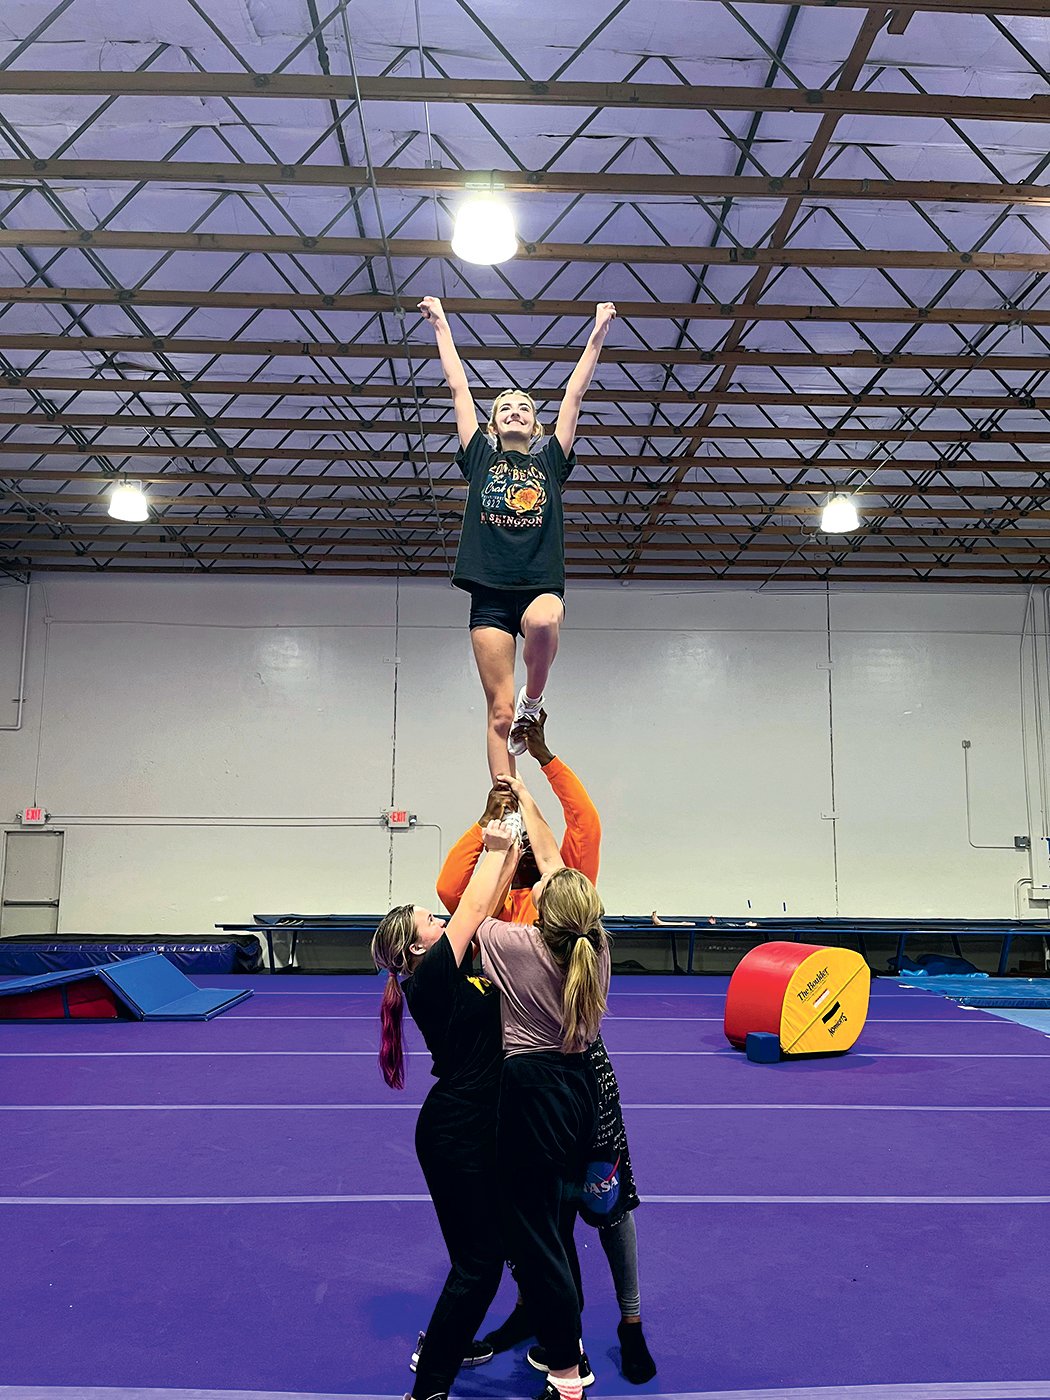 A group of cheerleaders form a tower at Cosmic Cheer.